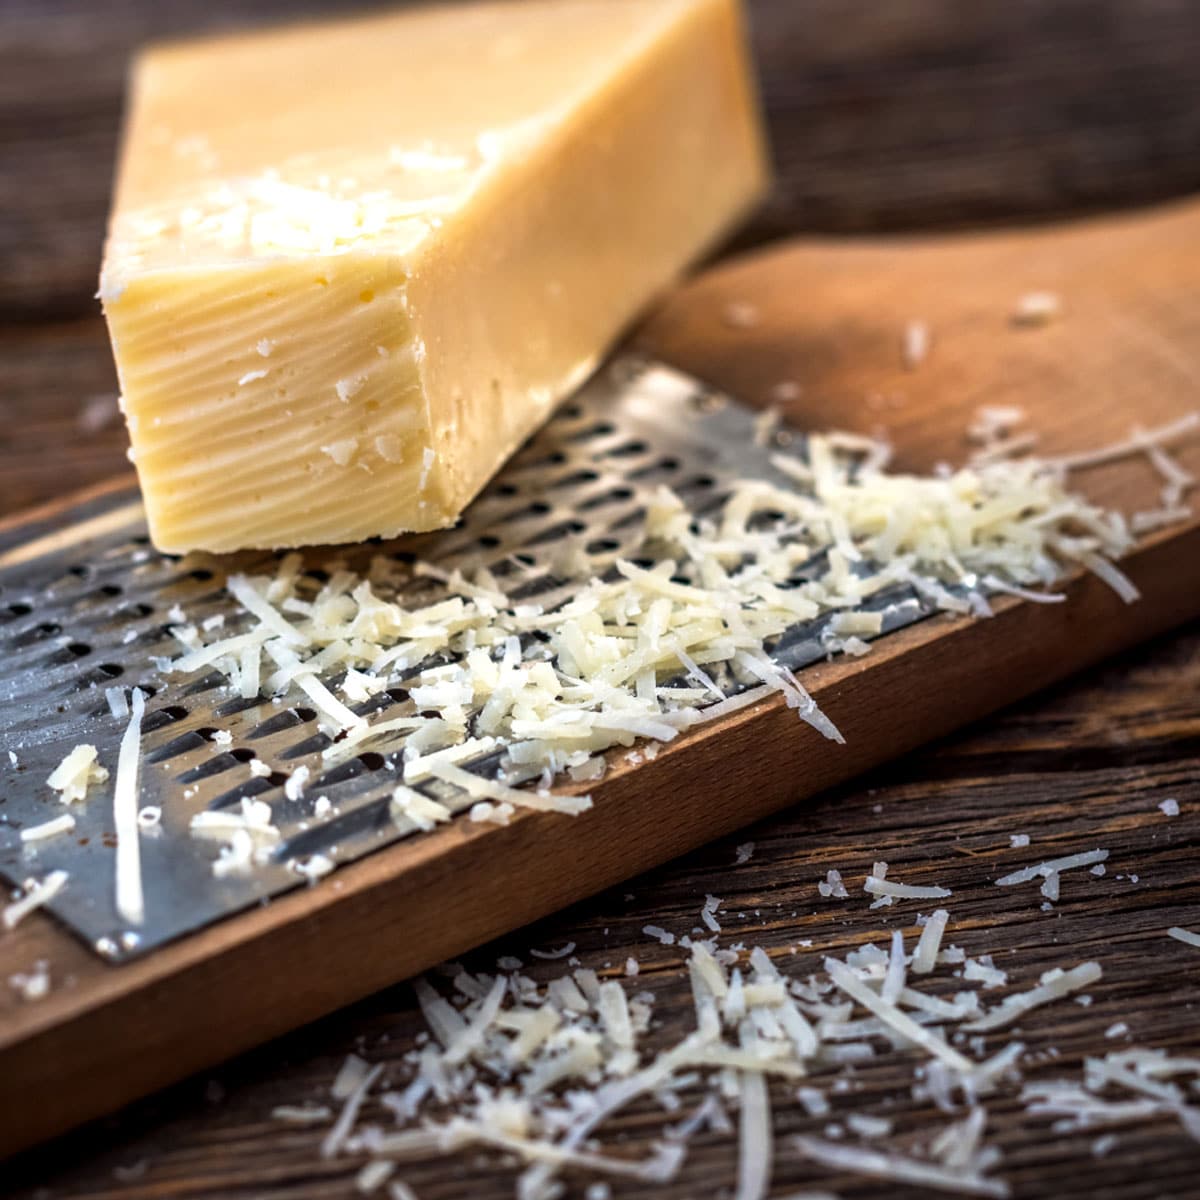 The type of cheese used can affect the tendency for shredded cheese to clump. Harder, aged cheeses such as Parmesan and cheddar tend to shred more finely and are less prone to clumping